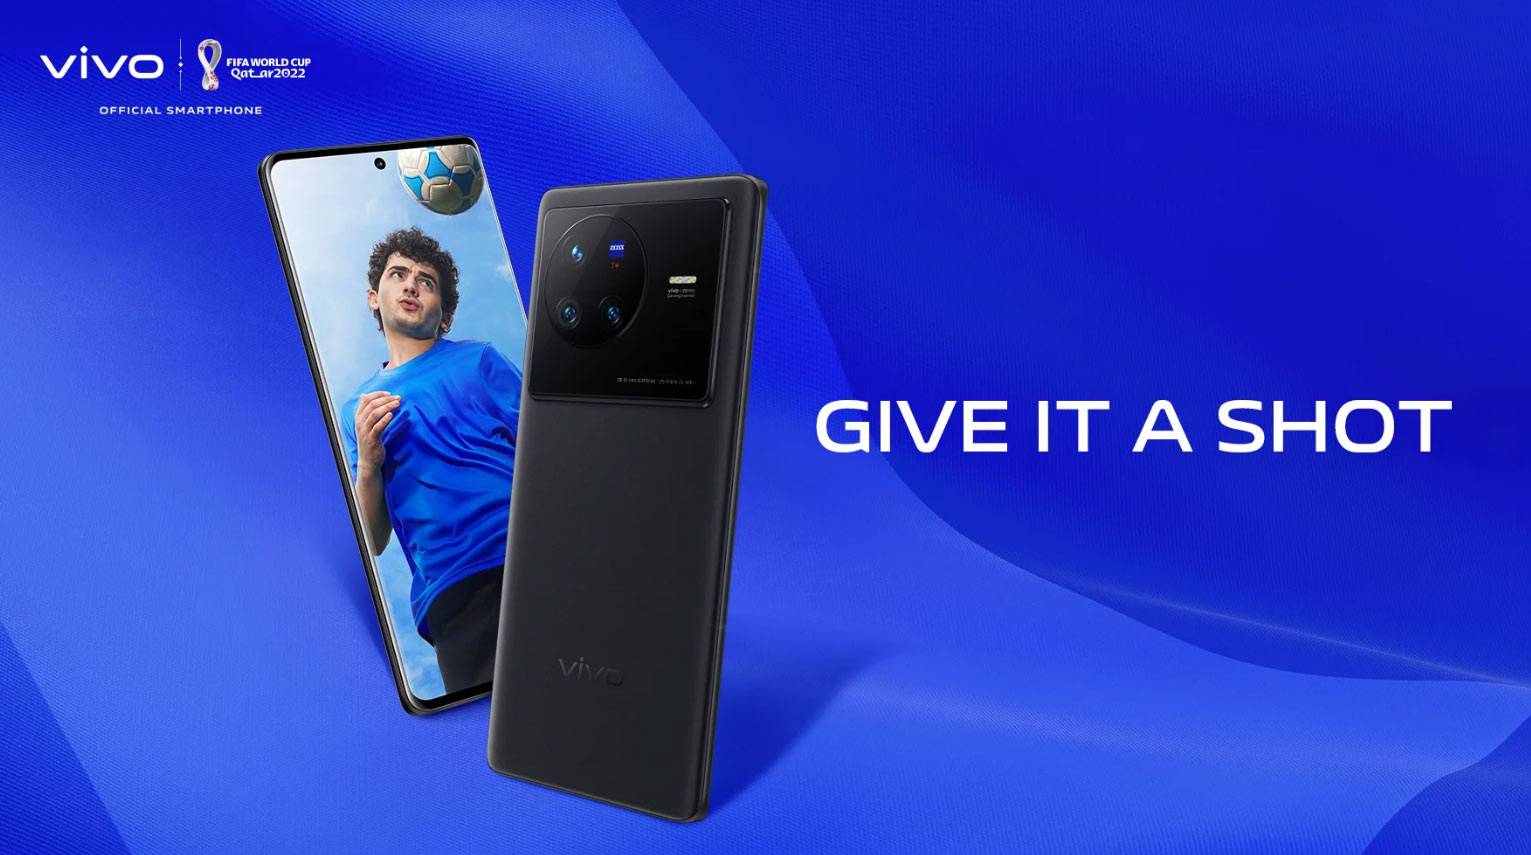 Unleash Your Creativity and Win Exclusive Gifts  with vivo’s ‘Give It a Shot’ Activity